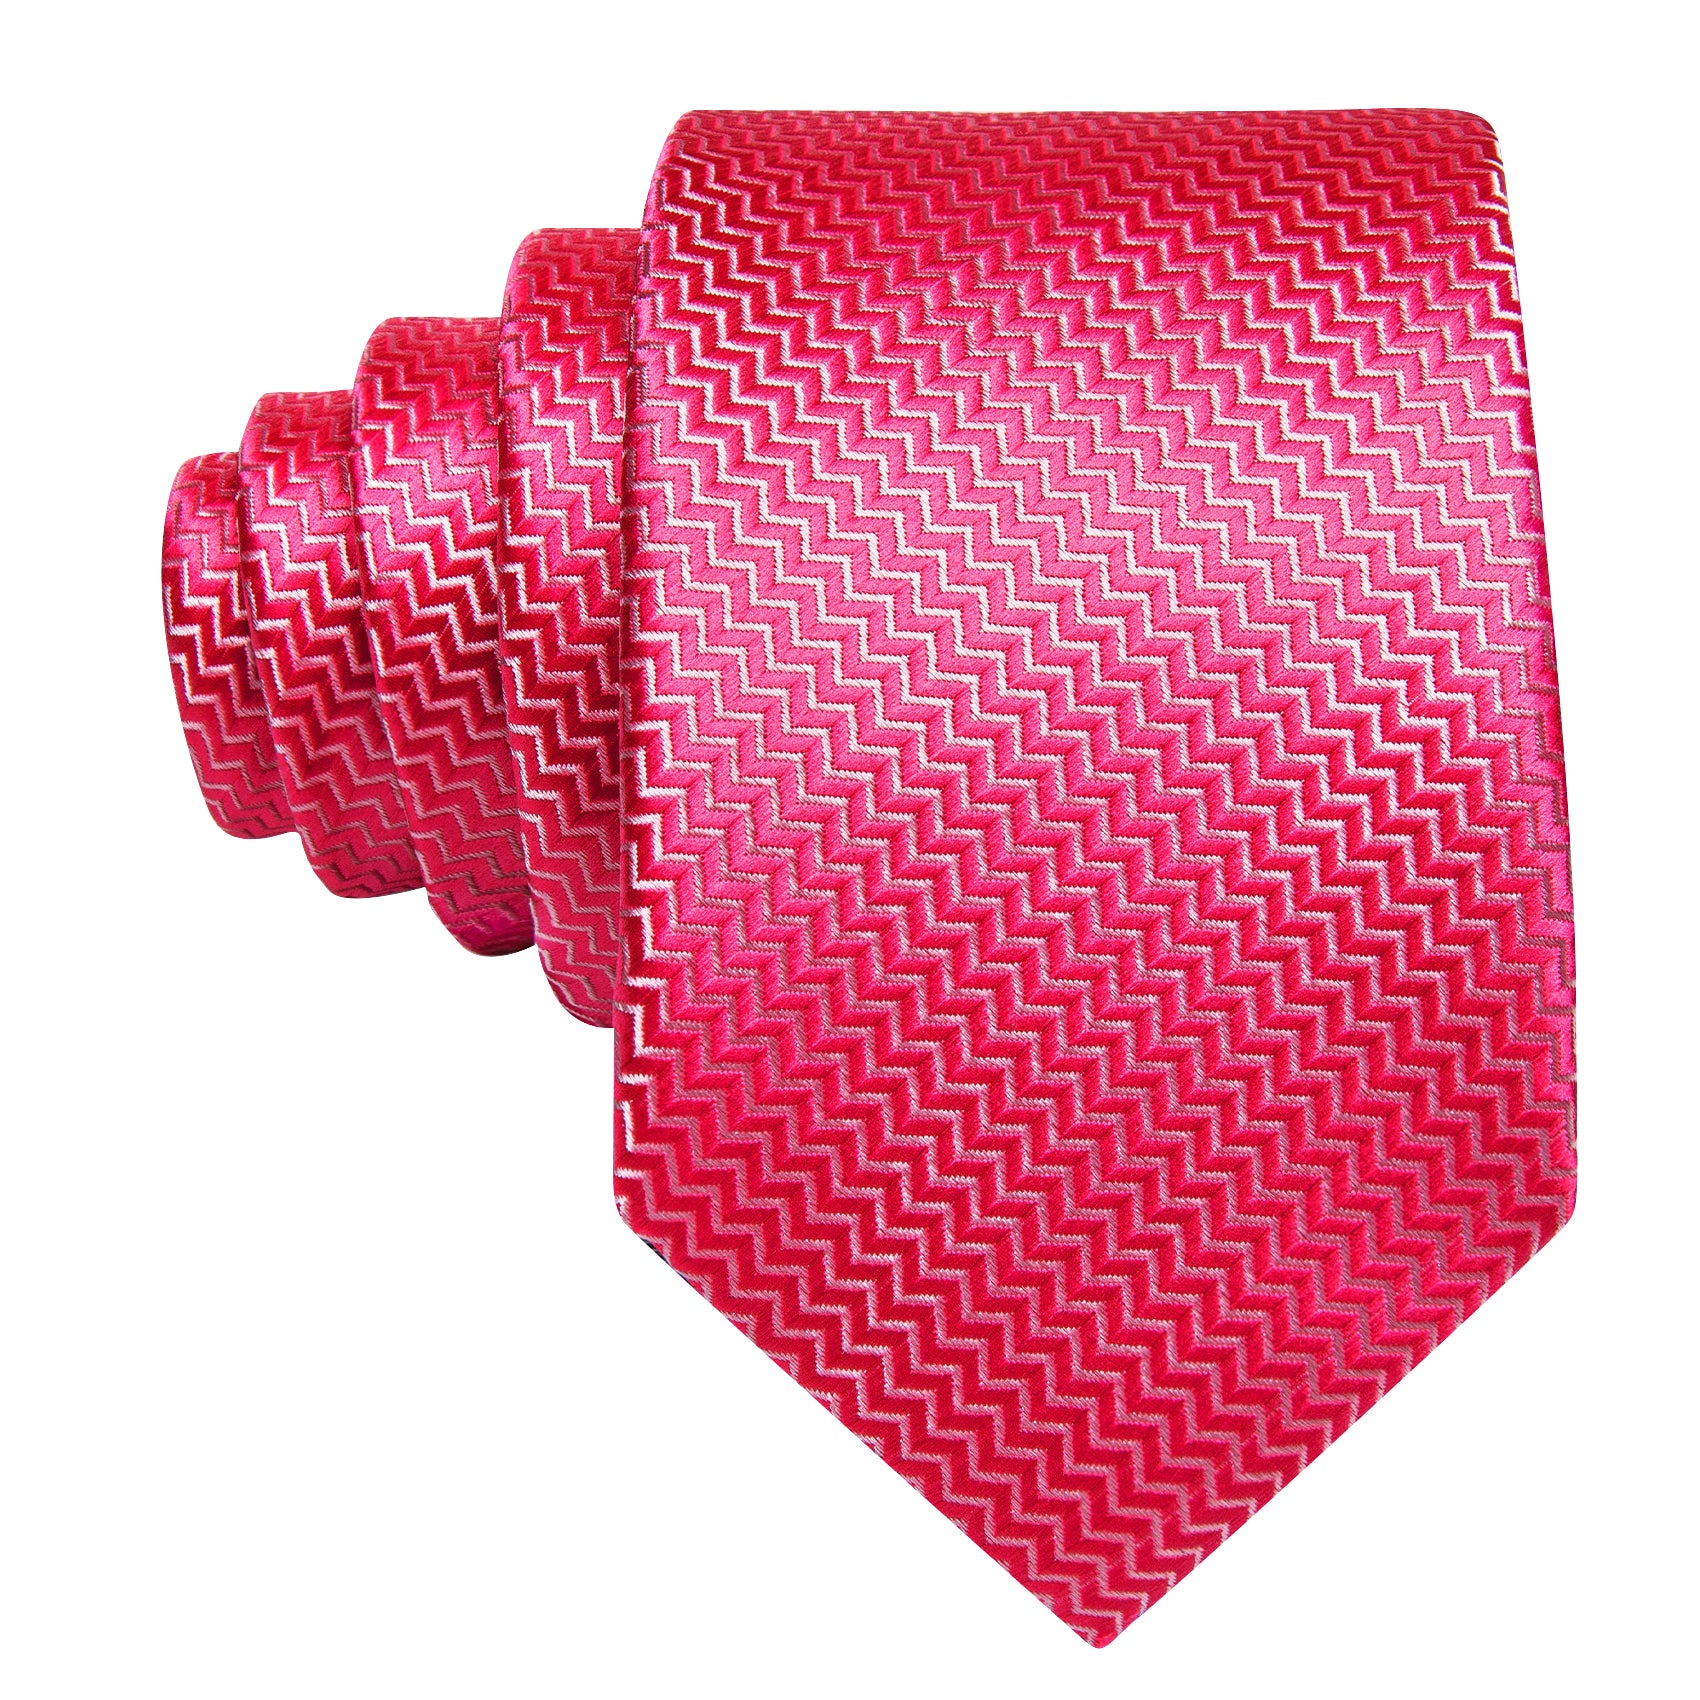 Rose Red Ripple Silk 63 Inches Extra Long Tie Hanky Cufflinks Set